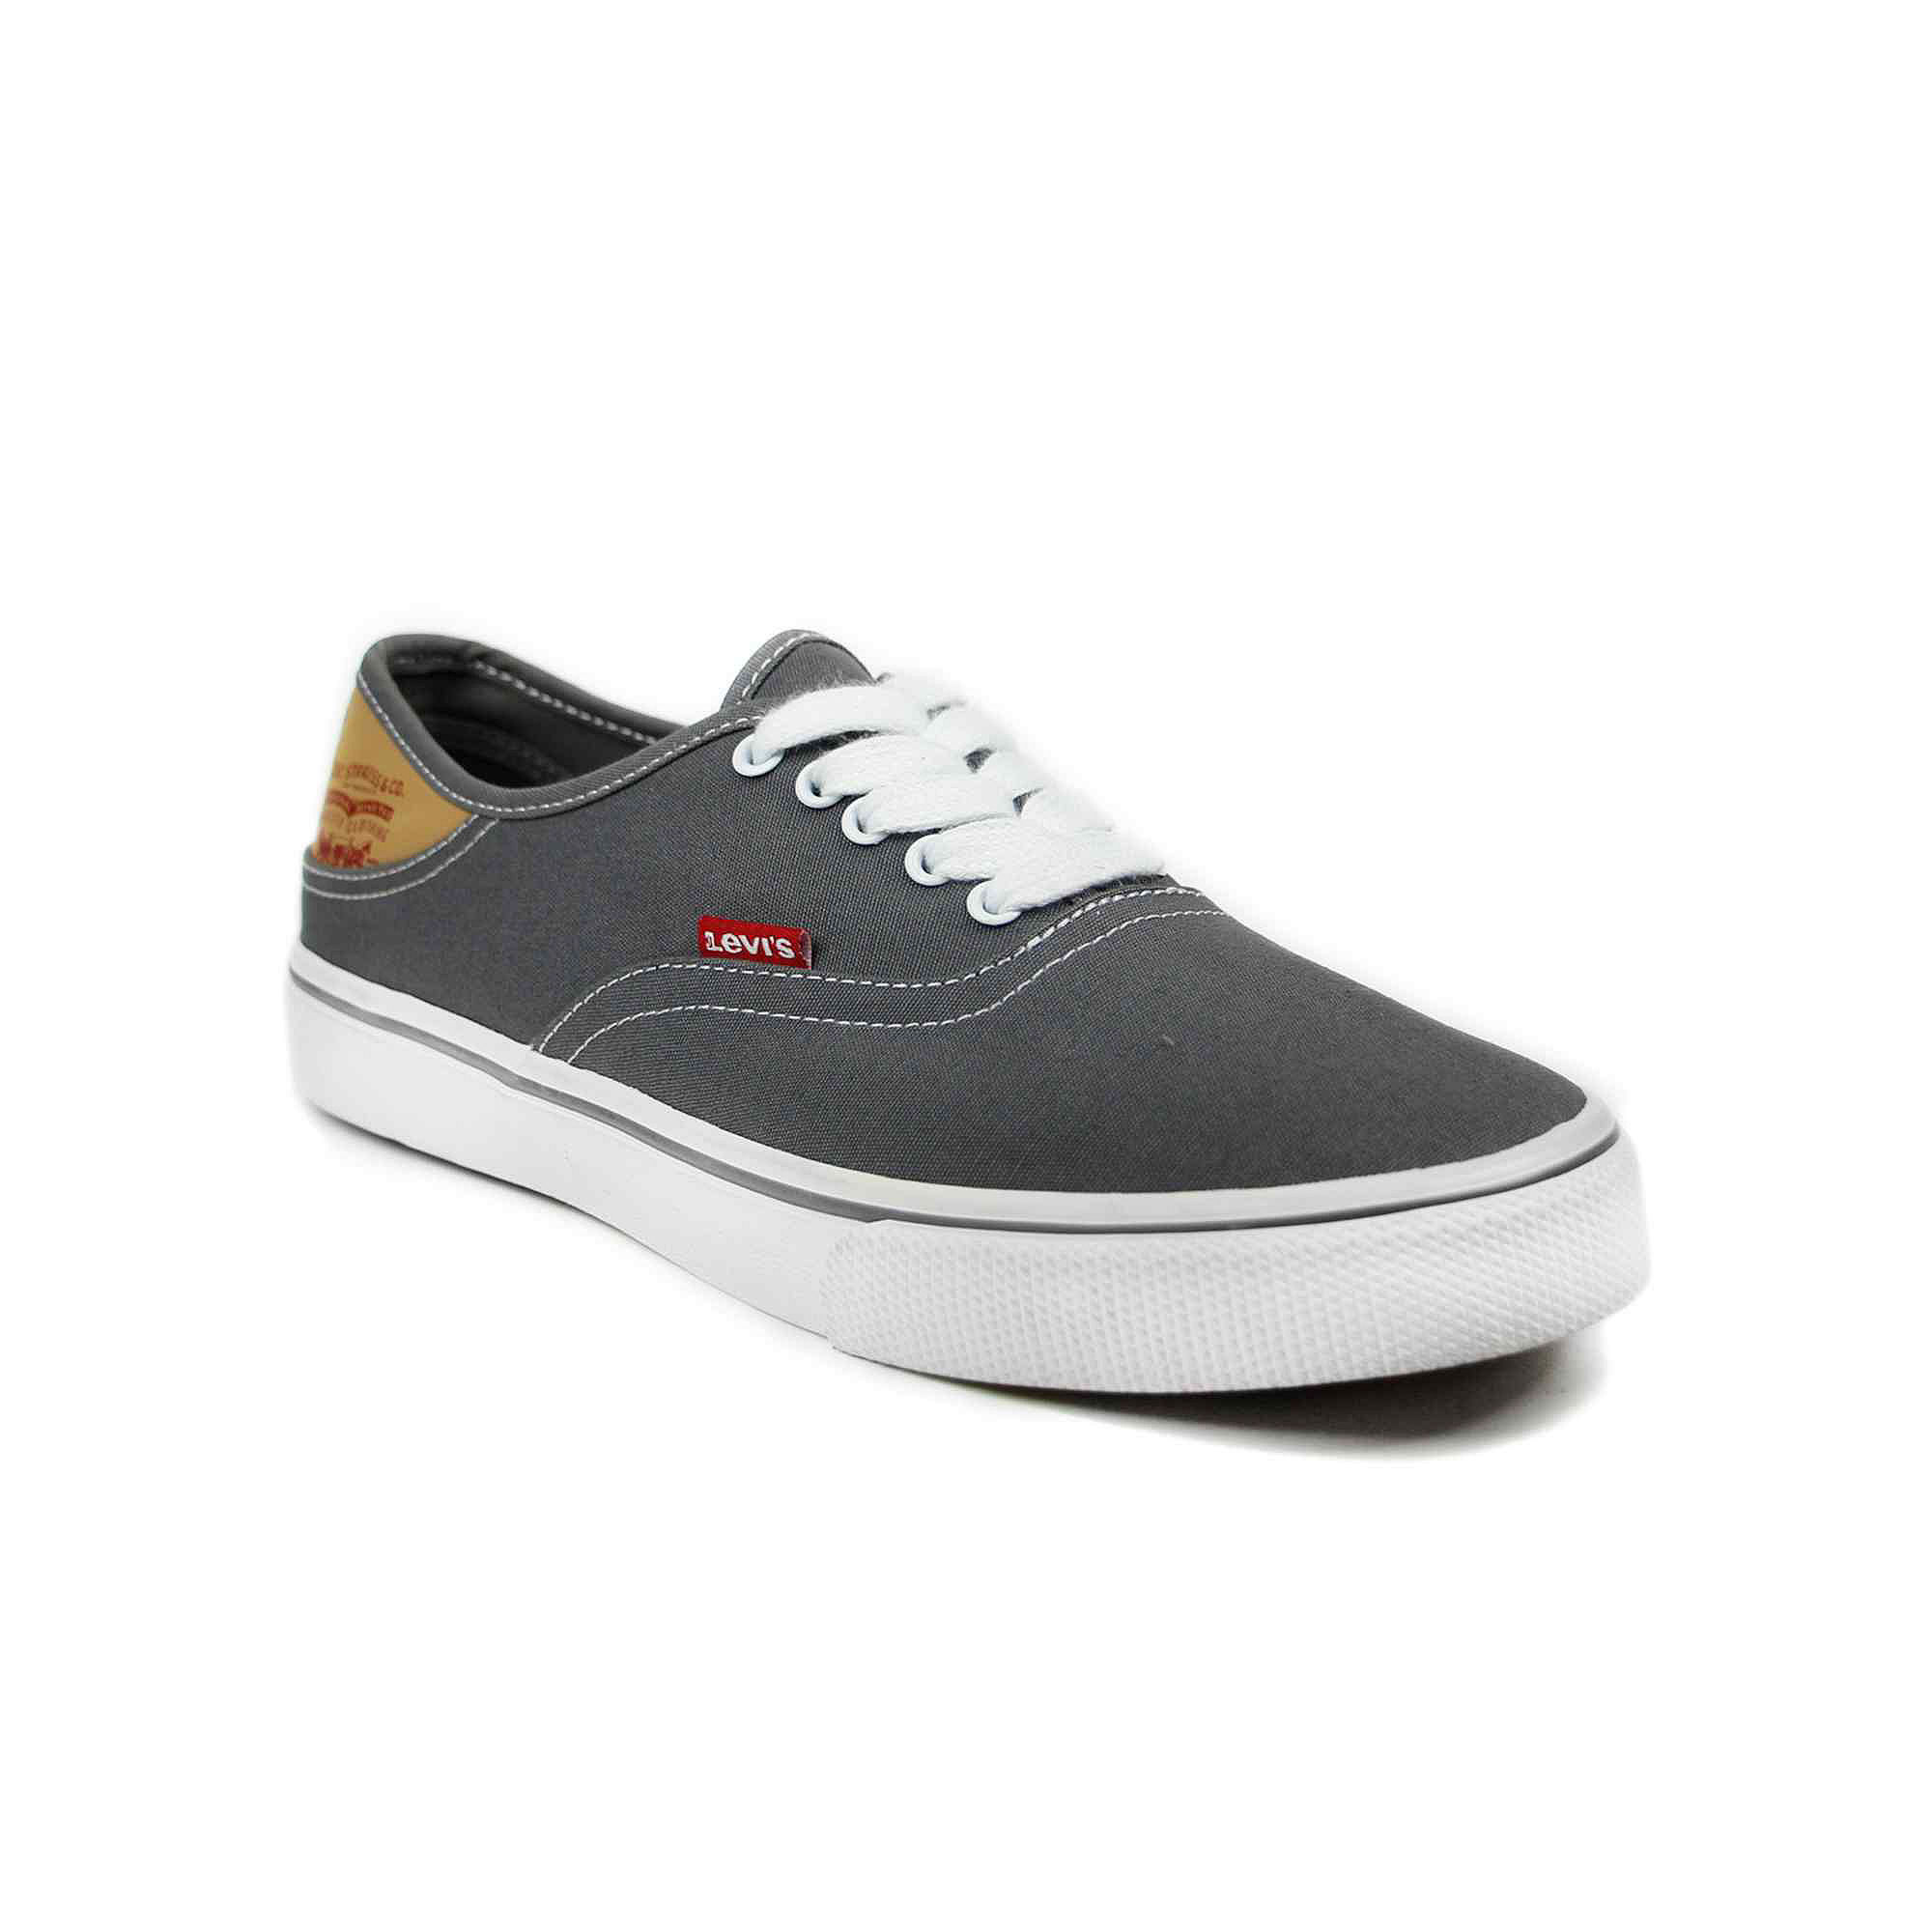 UPC 887326867612 product image for Levis Jordy Buck Mens Sneakers | upcitemdb.com